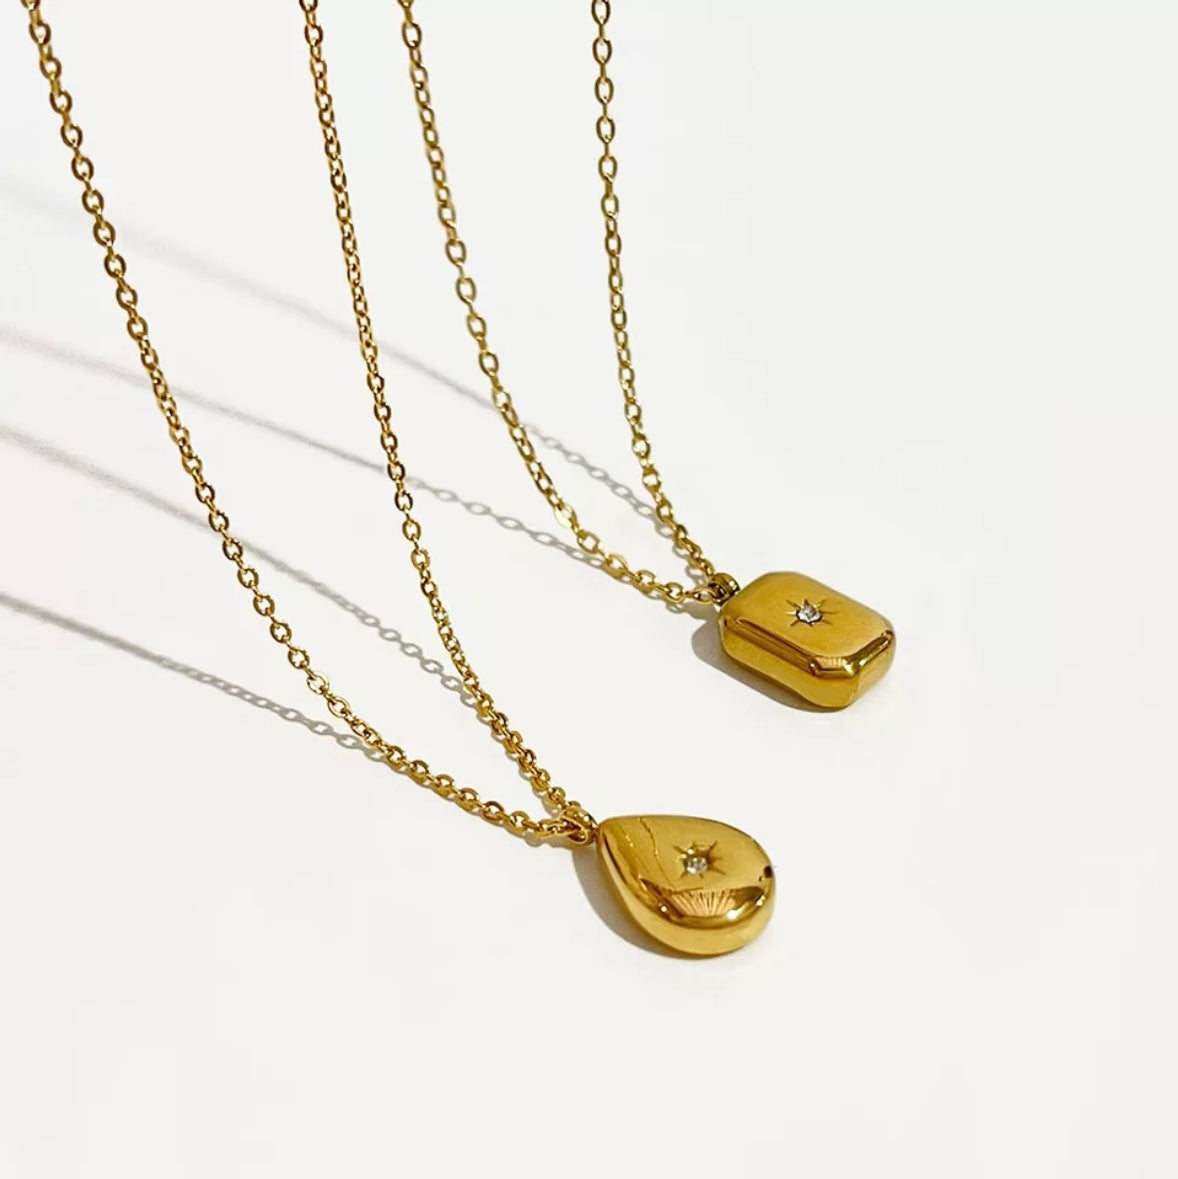 Raindrop necklaces for women in gold and sterling silver, Sydney Australia